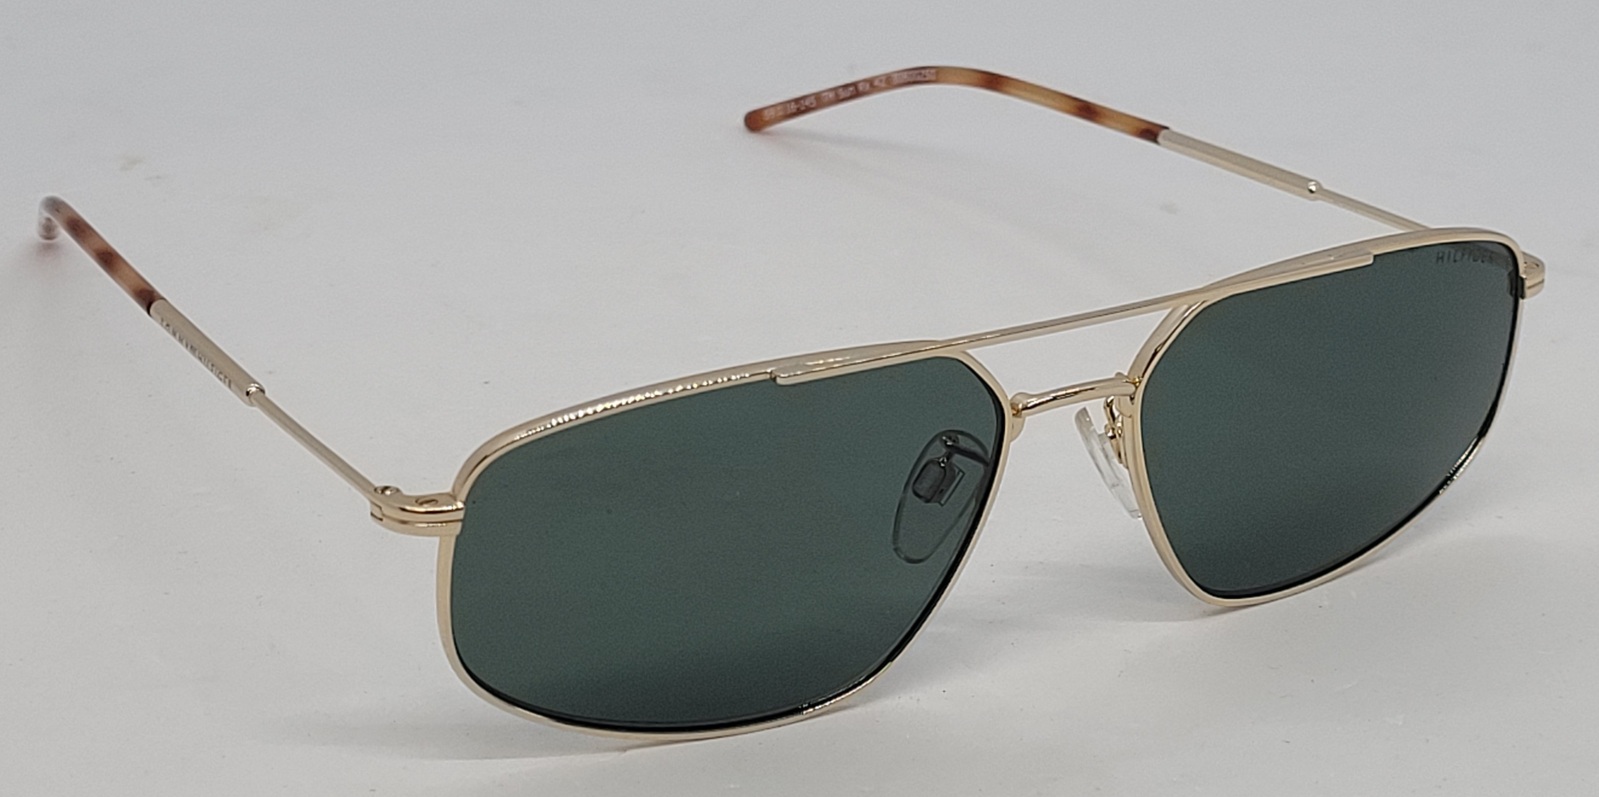 Tommy Hilfiger TH SUN RX 42 Gold Frame Women's Sunglasses (Pre-Owned)